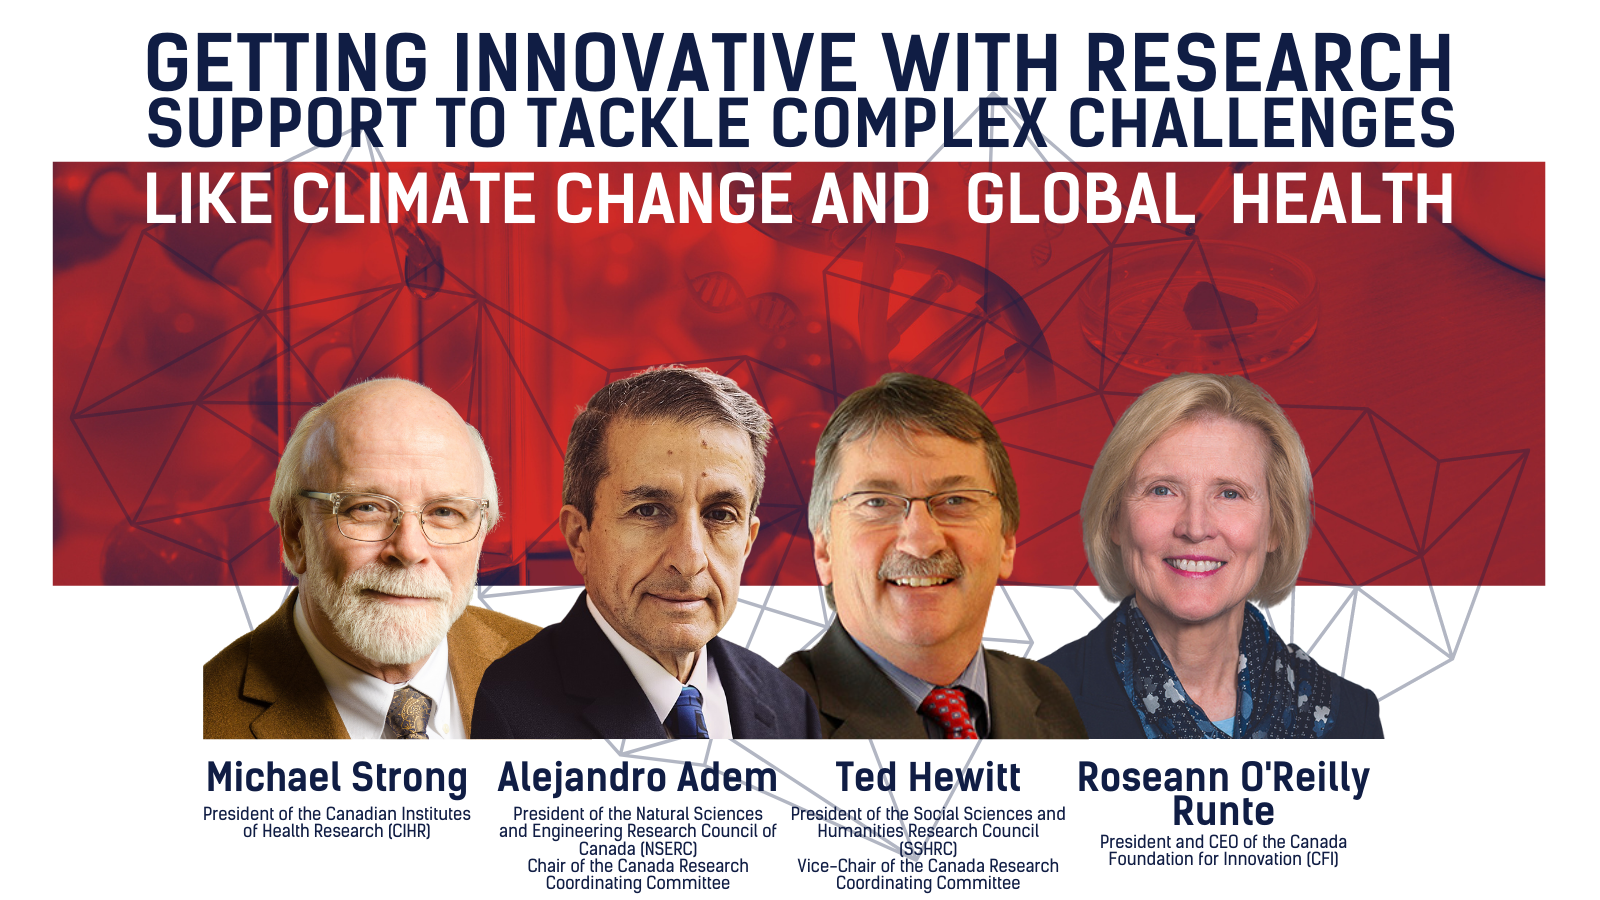 A banner with the title "Getting innovative with research support to tackle complex challenges like climate change and global health" with the headshots of 3 men and a woman on a red background